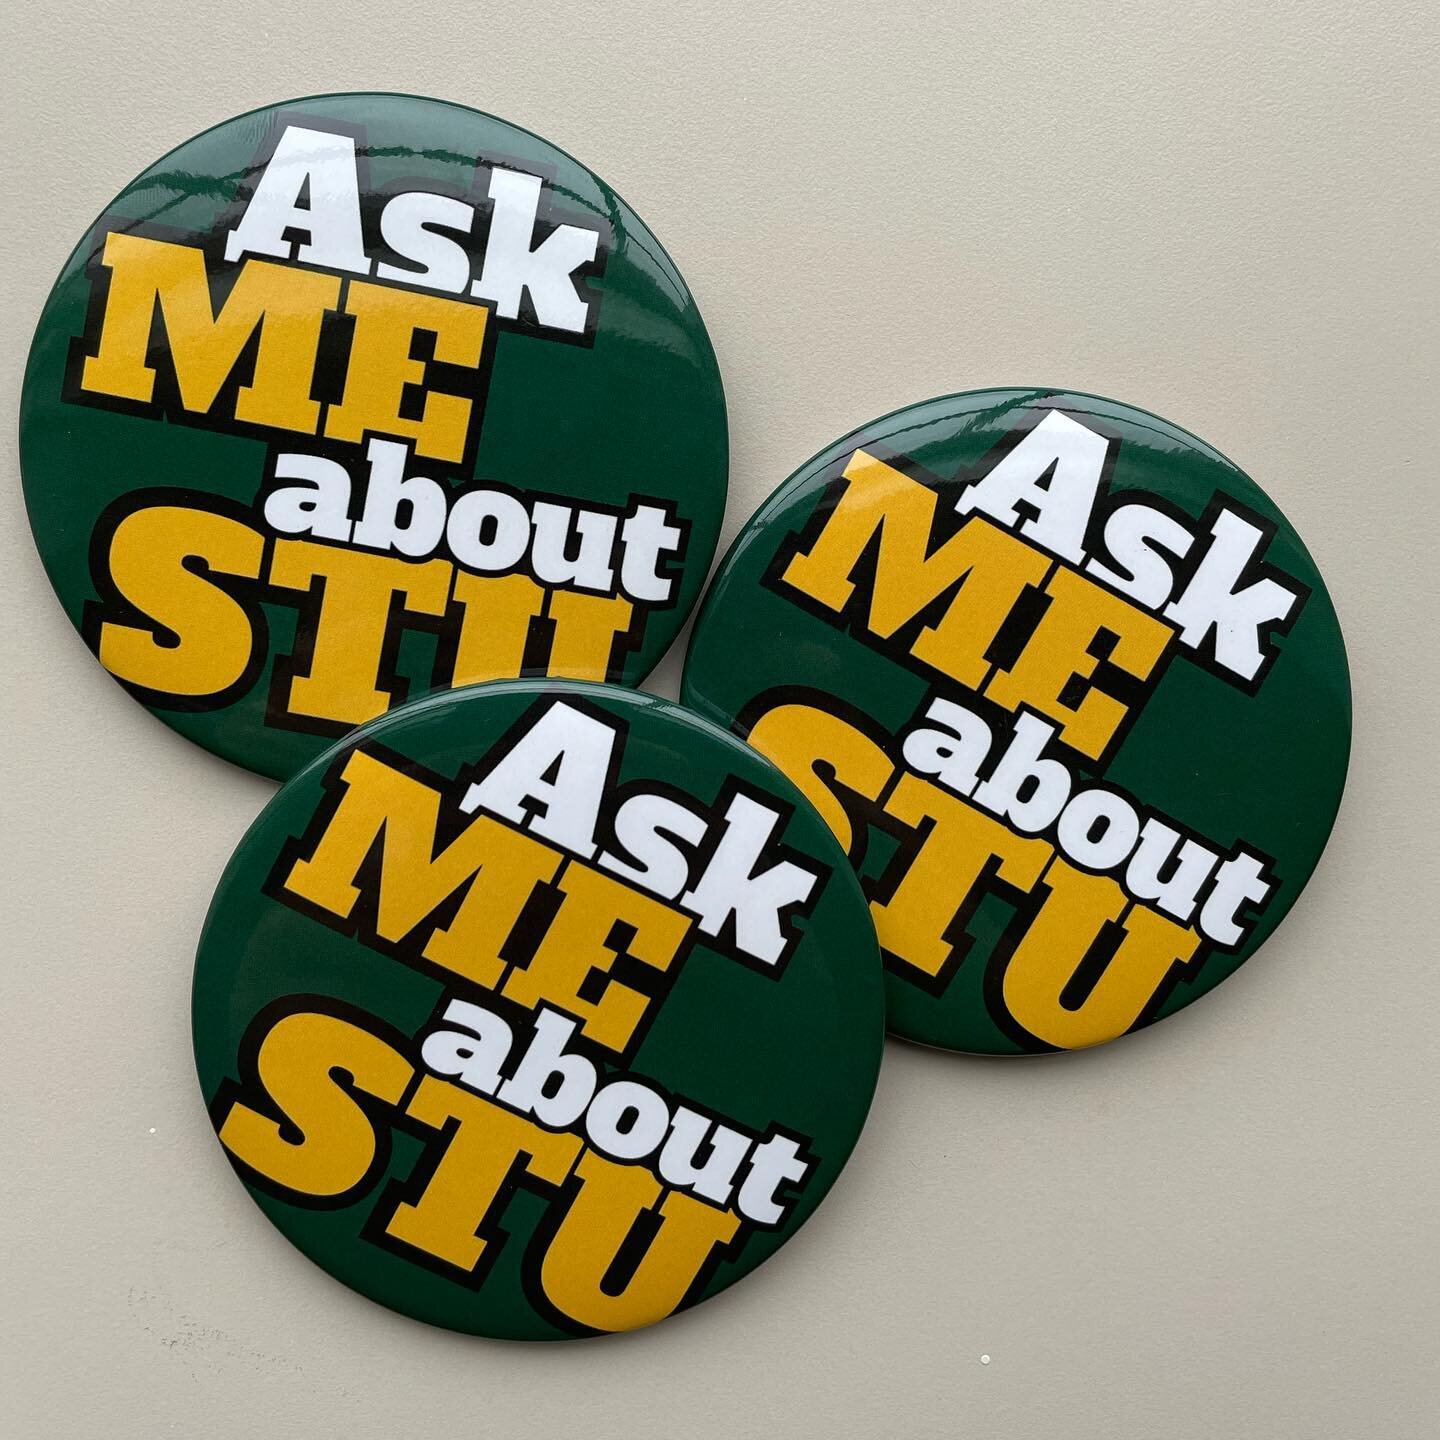 Are you new to STU?

To help make your transition easier, the Welcome Week team has pulled together some of the most frequently asked (and answered) questions about St. Thomas University.

Look for faculty, staff, and students wearing Ask Me About ST